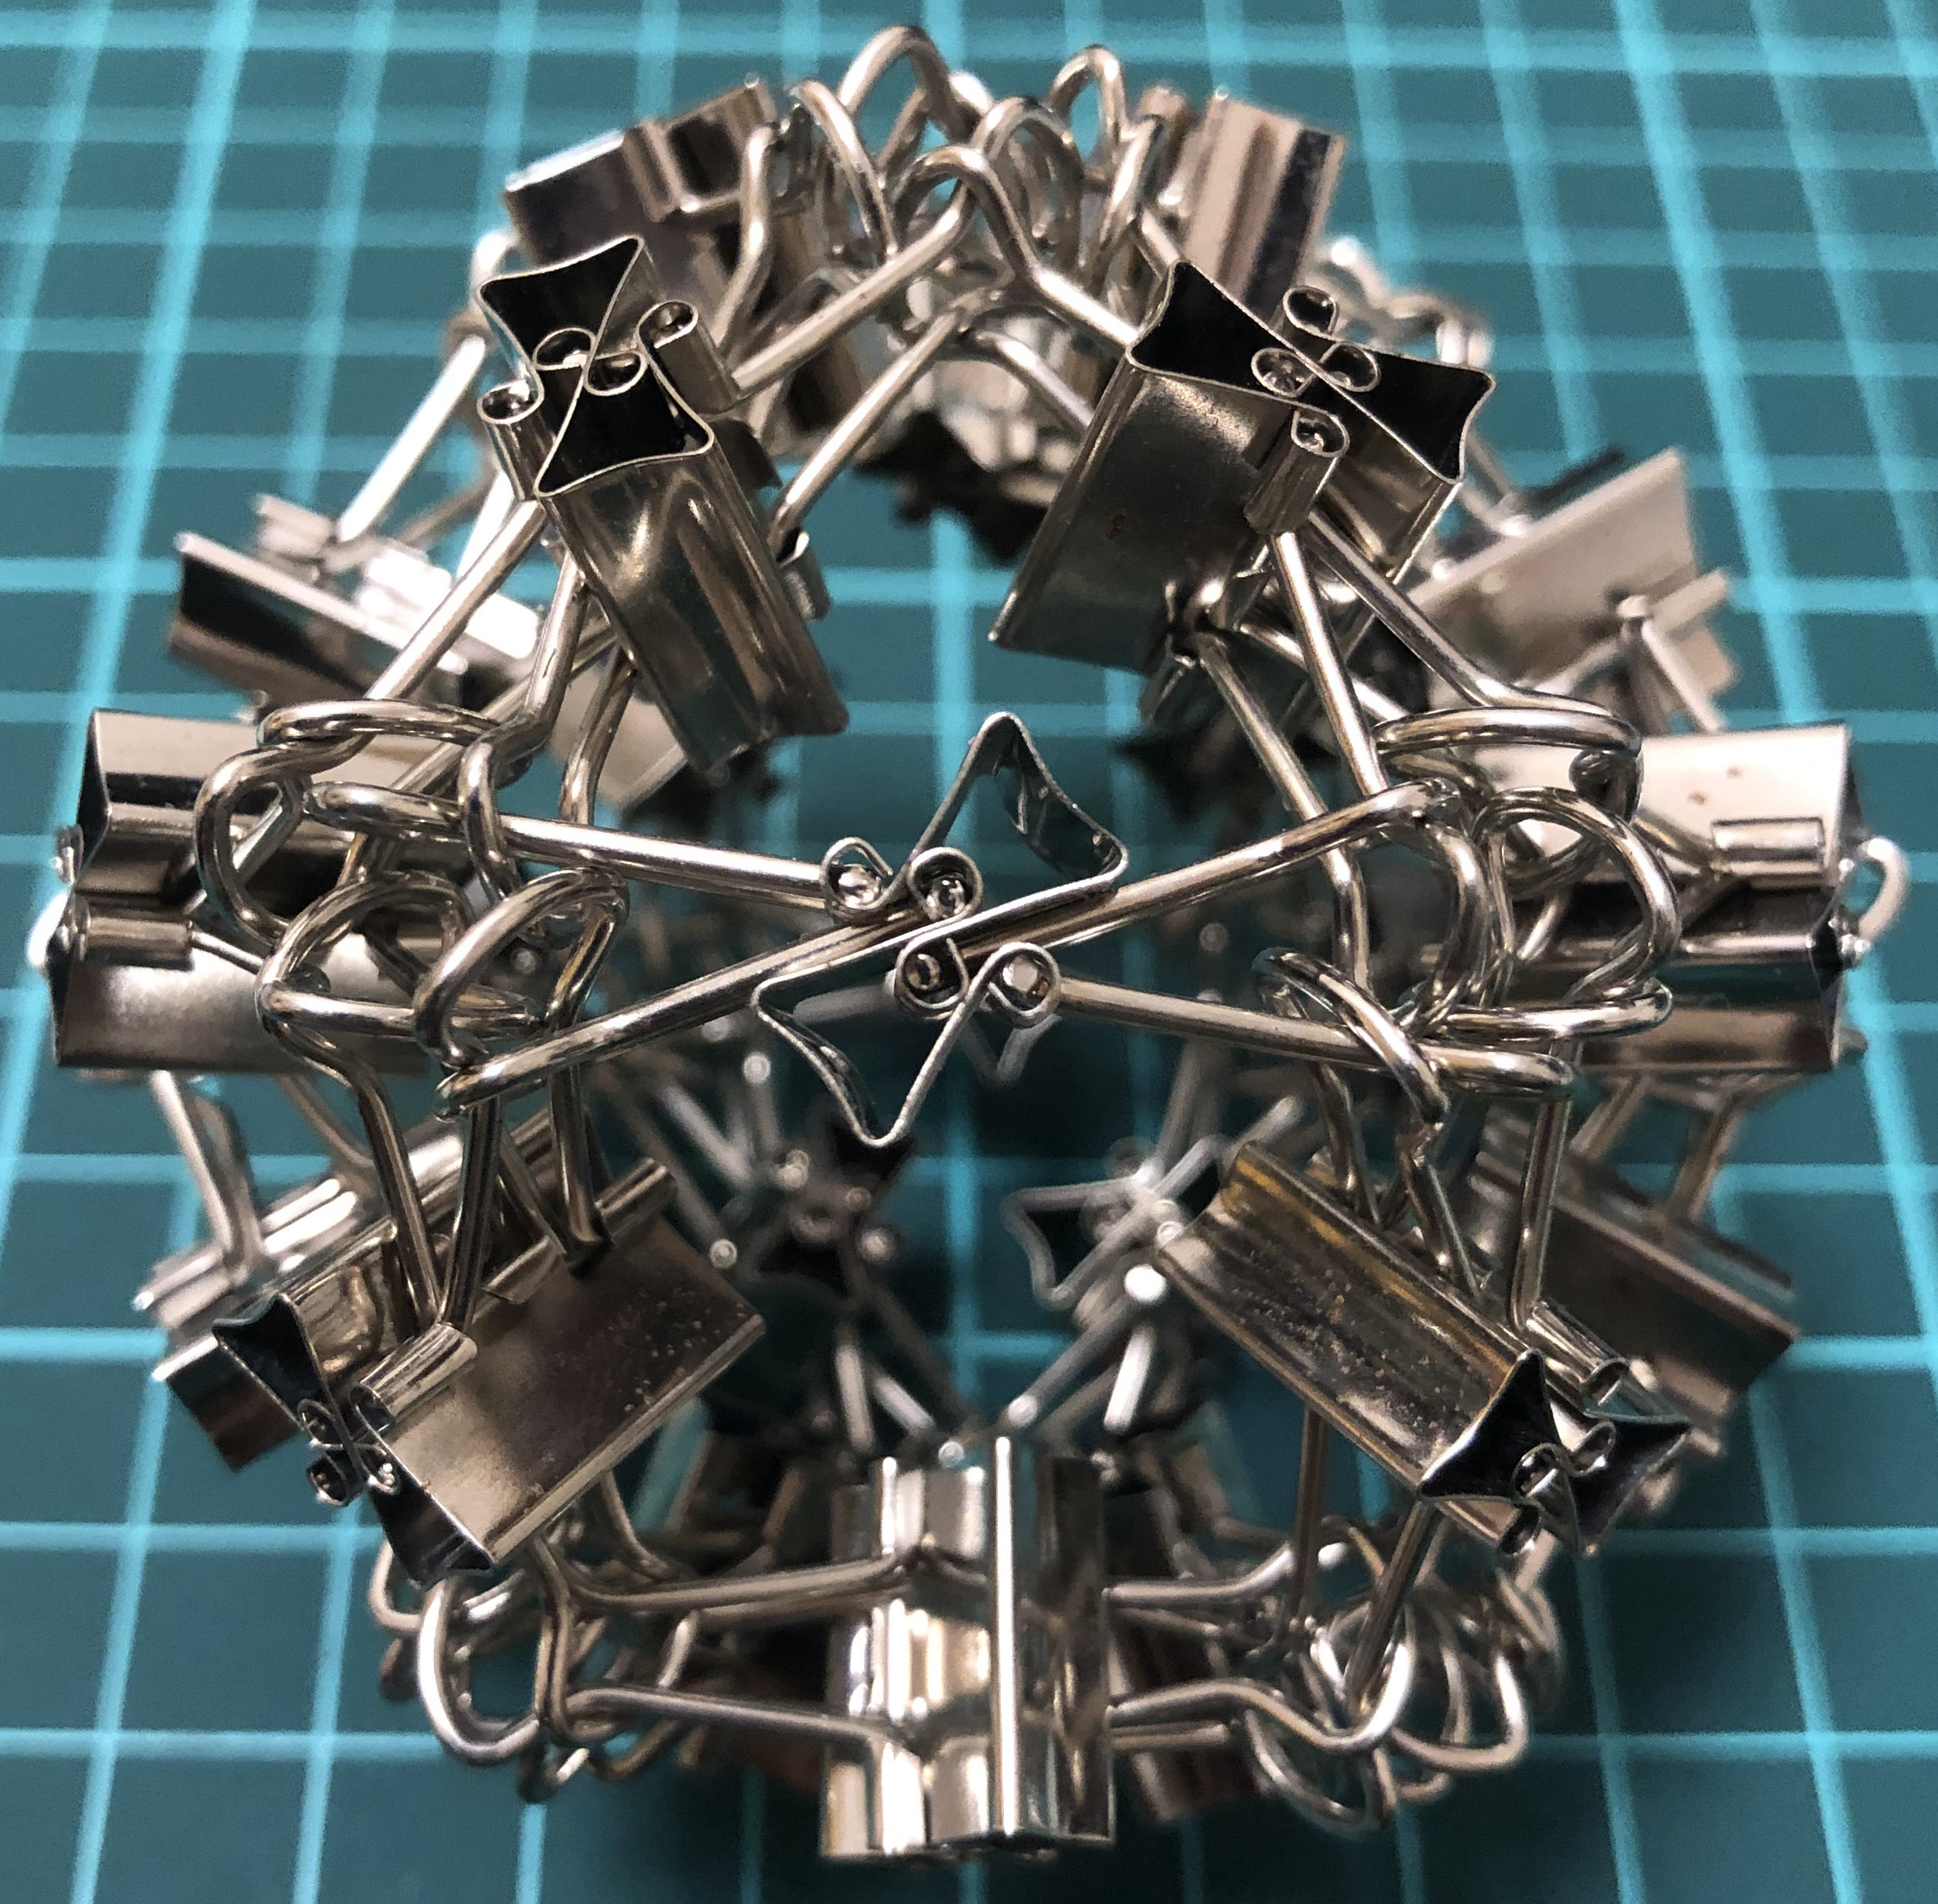 48 clips forming 24 I-edges forming cuboctahedron